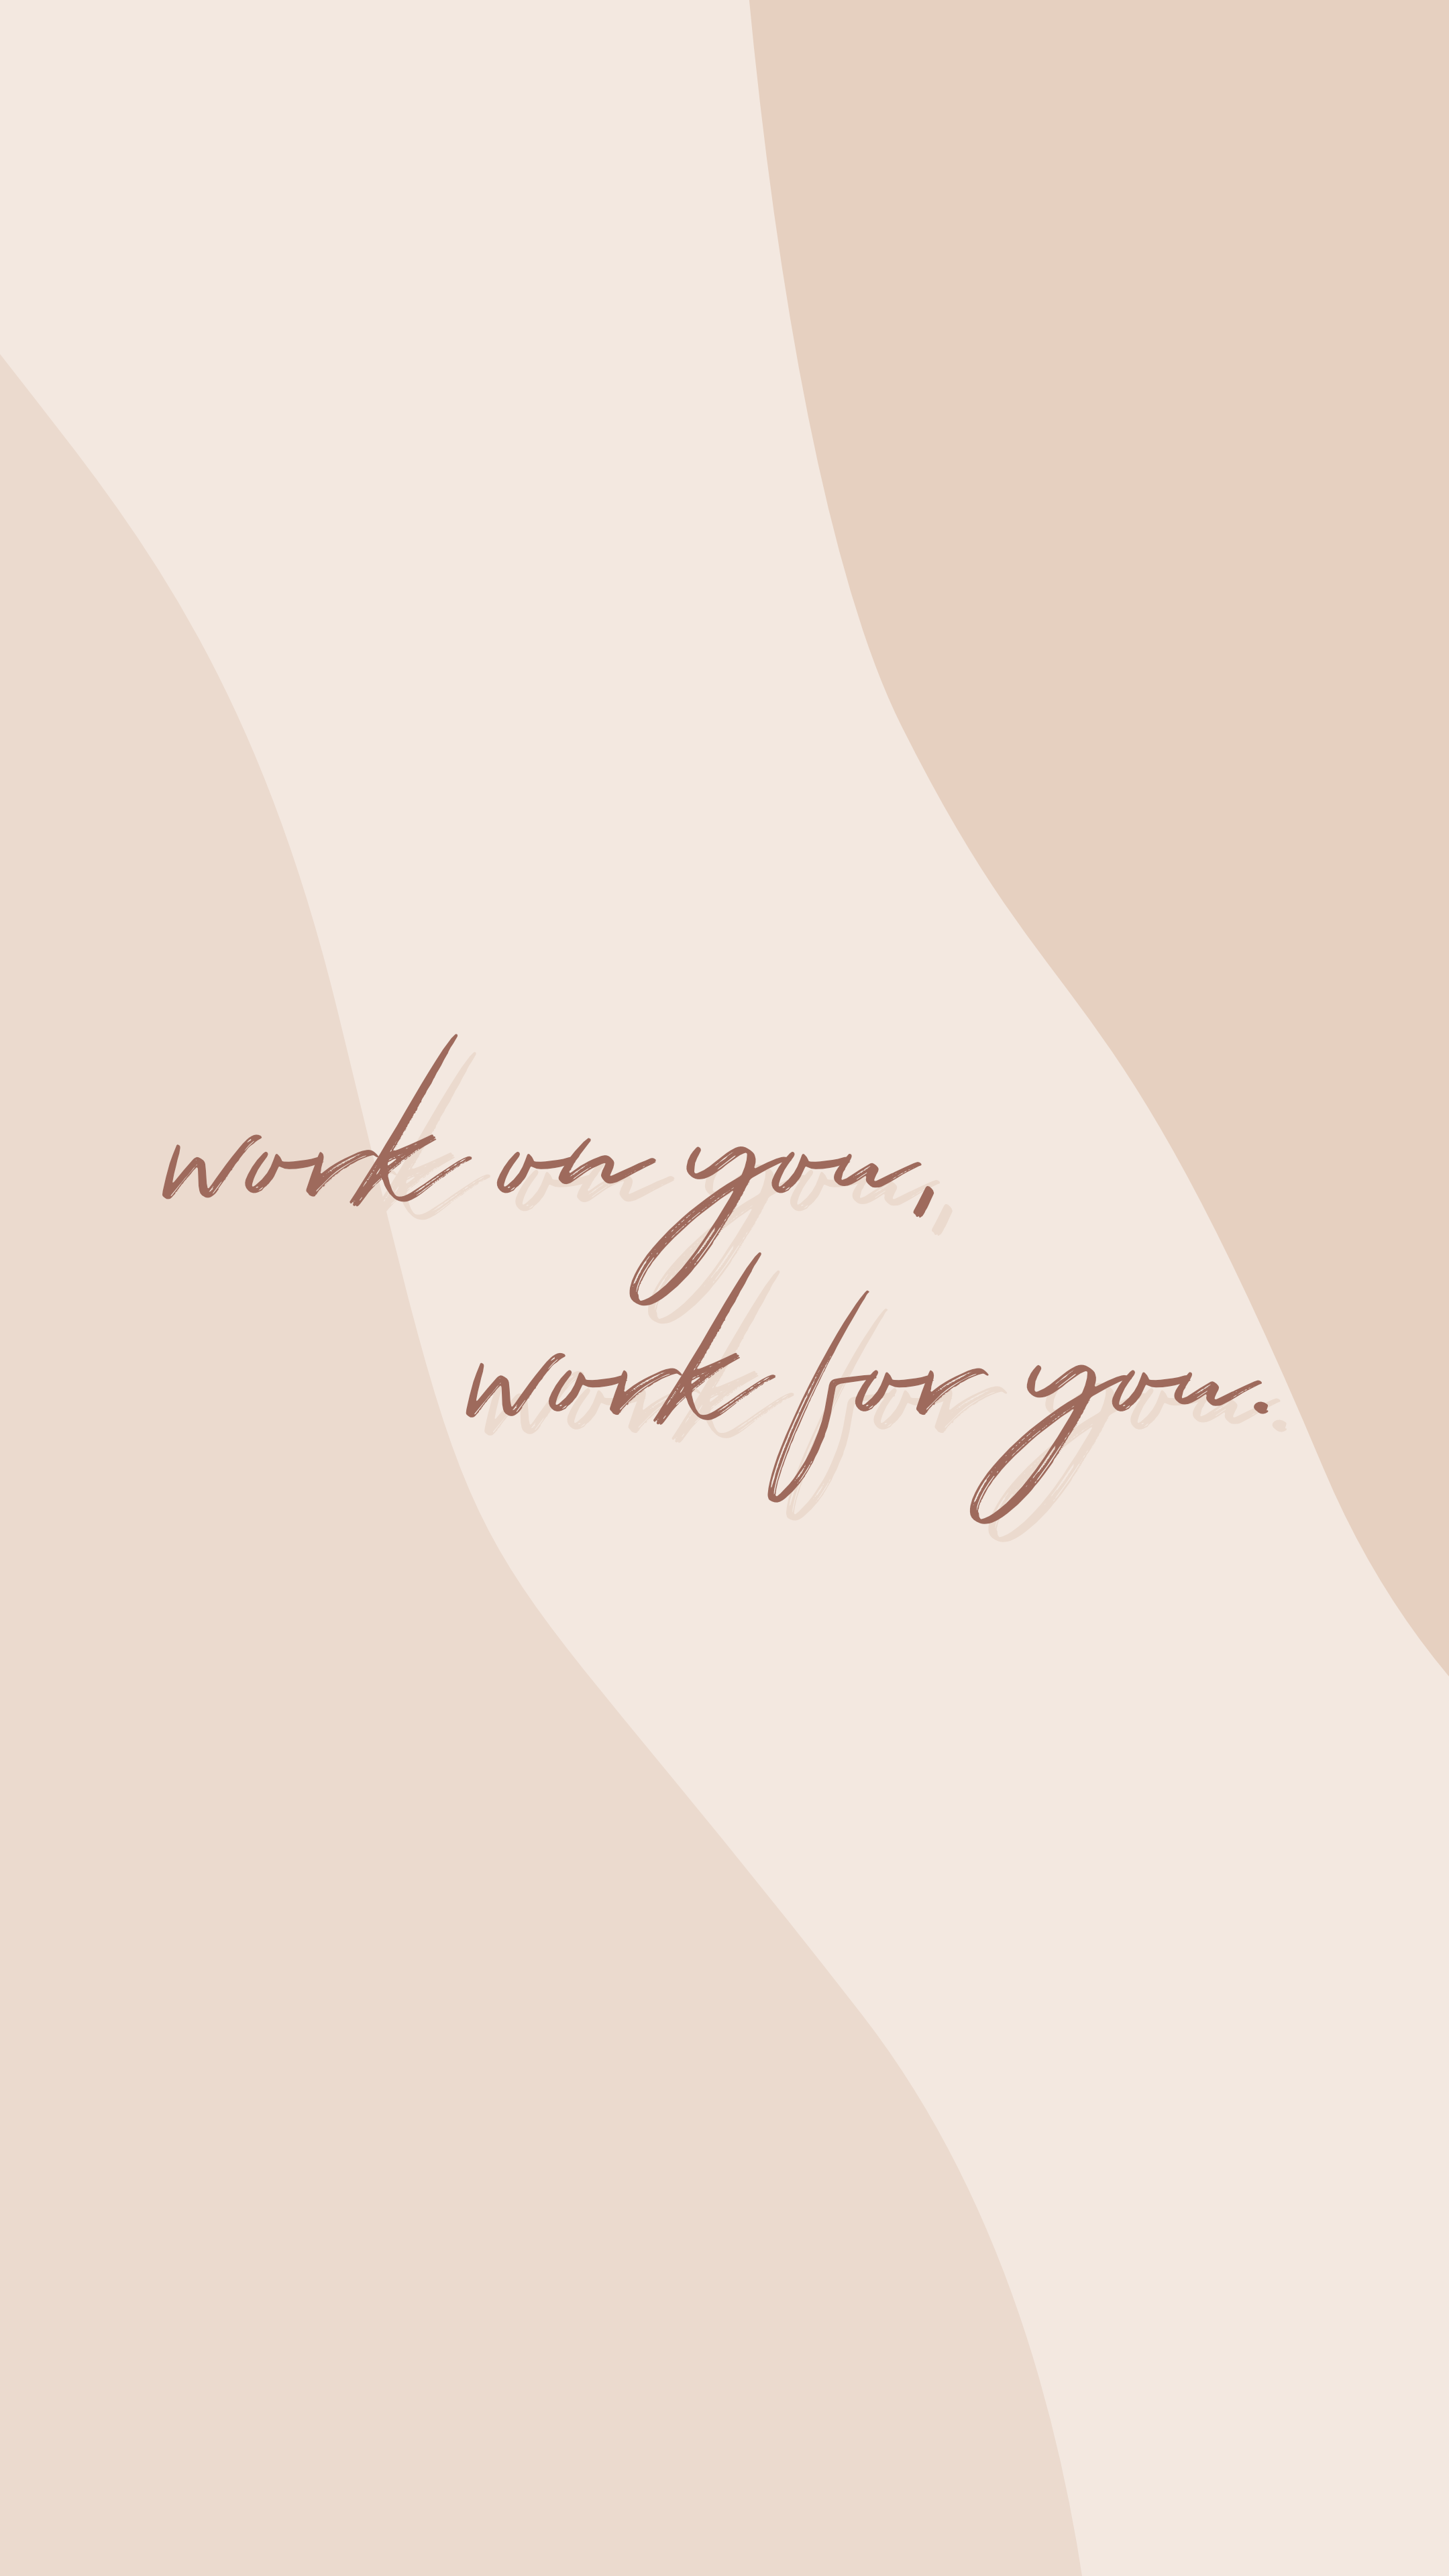 Mobile 4K Wallpaper work on you, work for you. by HeadsCreate. Minimalist quotes, Quote aesthetic, Wallpaper quotes